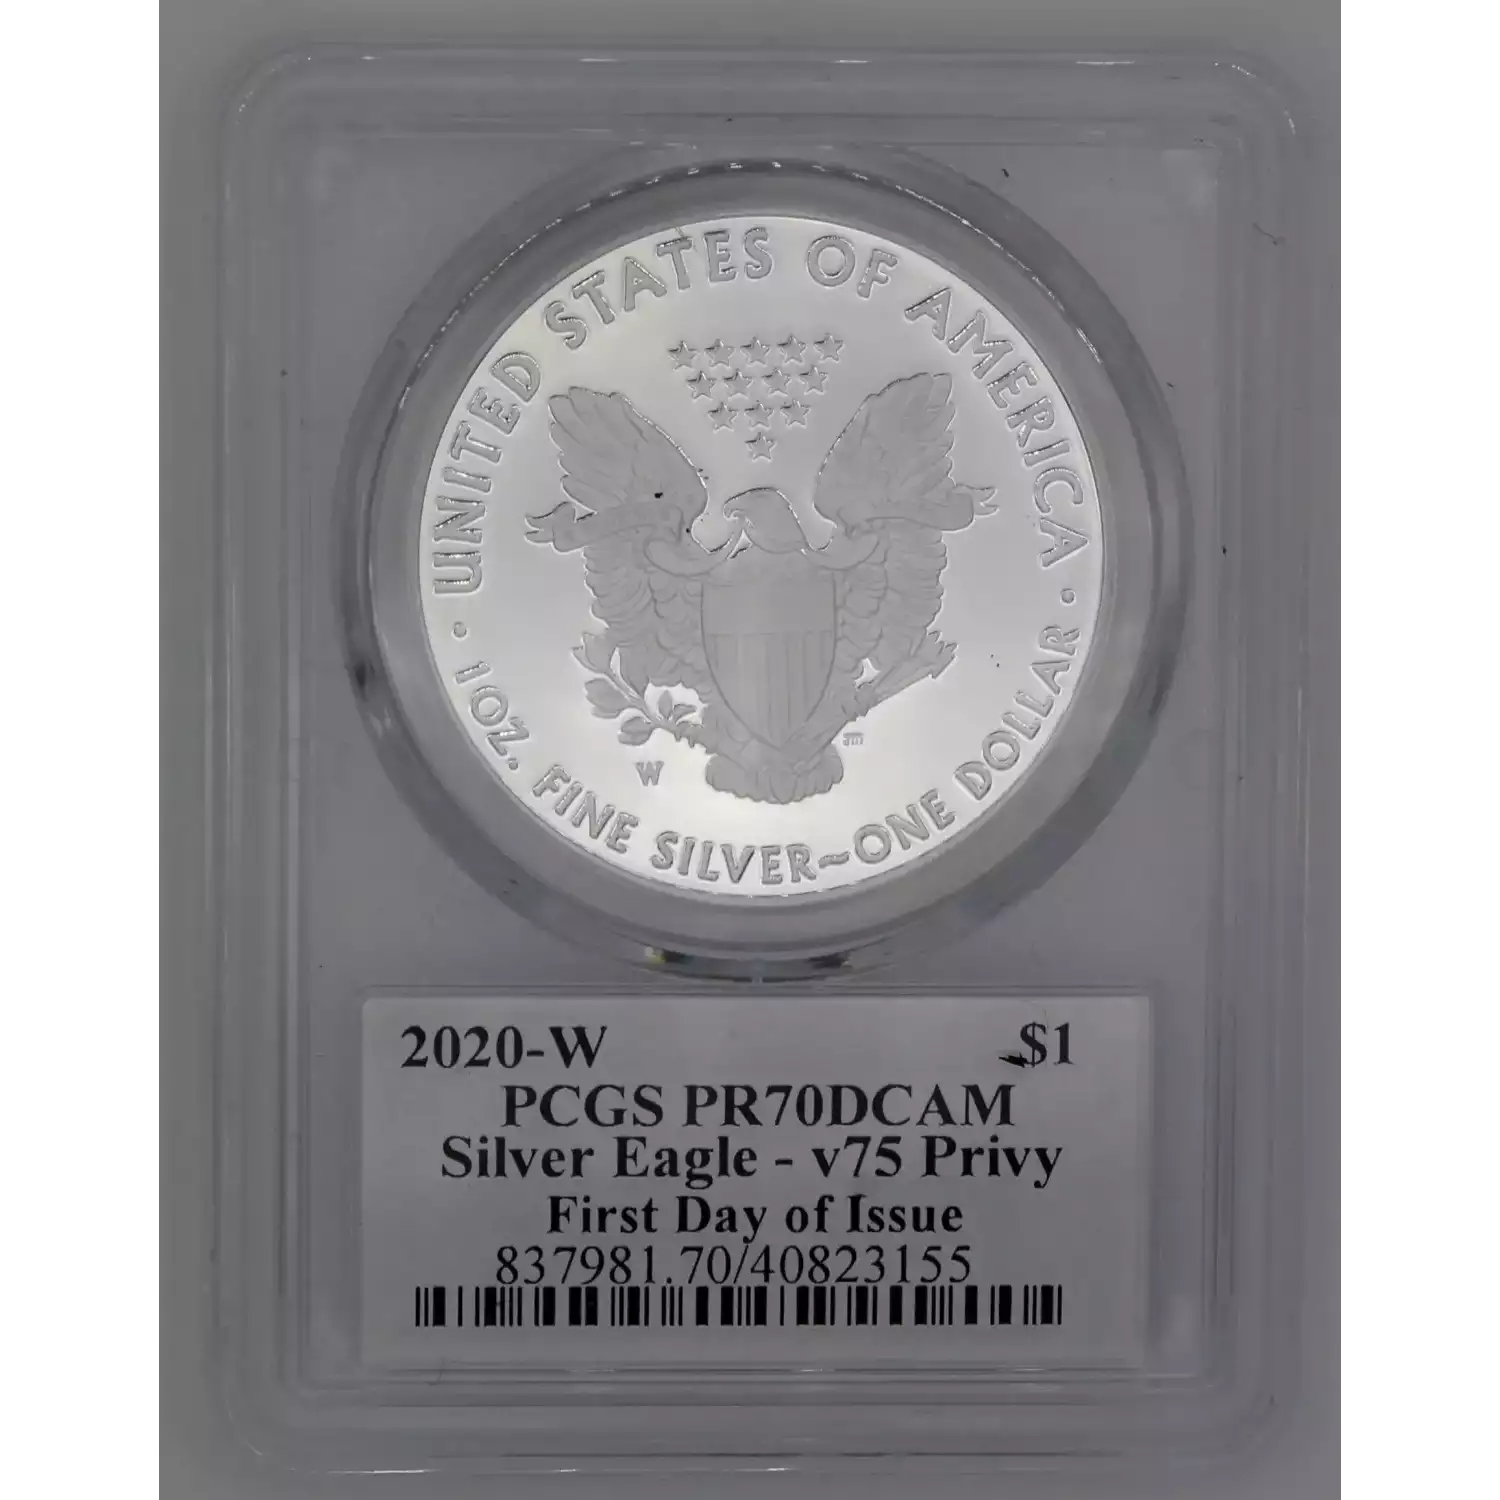 2020-W Silver Eagle Proof End of World War 2 V75 Privy PCGS PR70DCAM First Day of Issue. Signed by American Entrepreneur Mark Cuban 
Mintage: 75,000

Includes PCGS Slabbed Certificate of Authenticity (2)